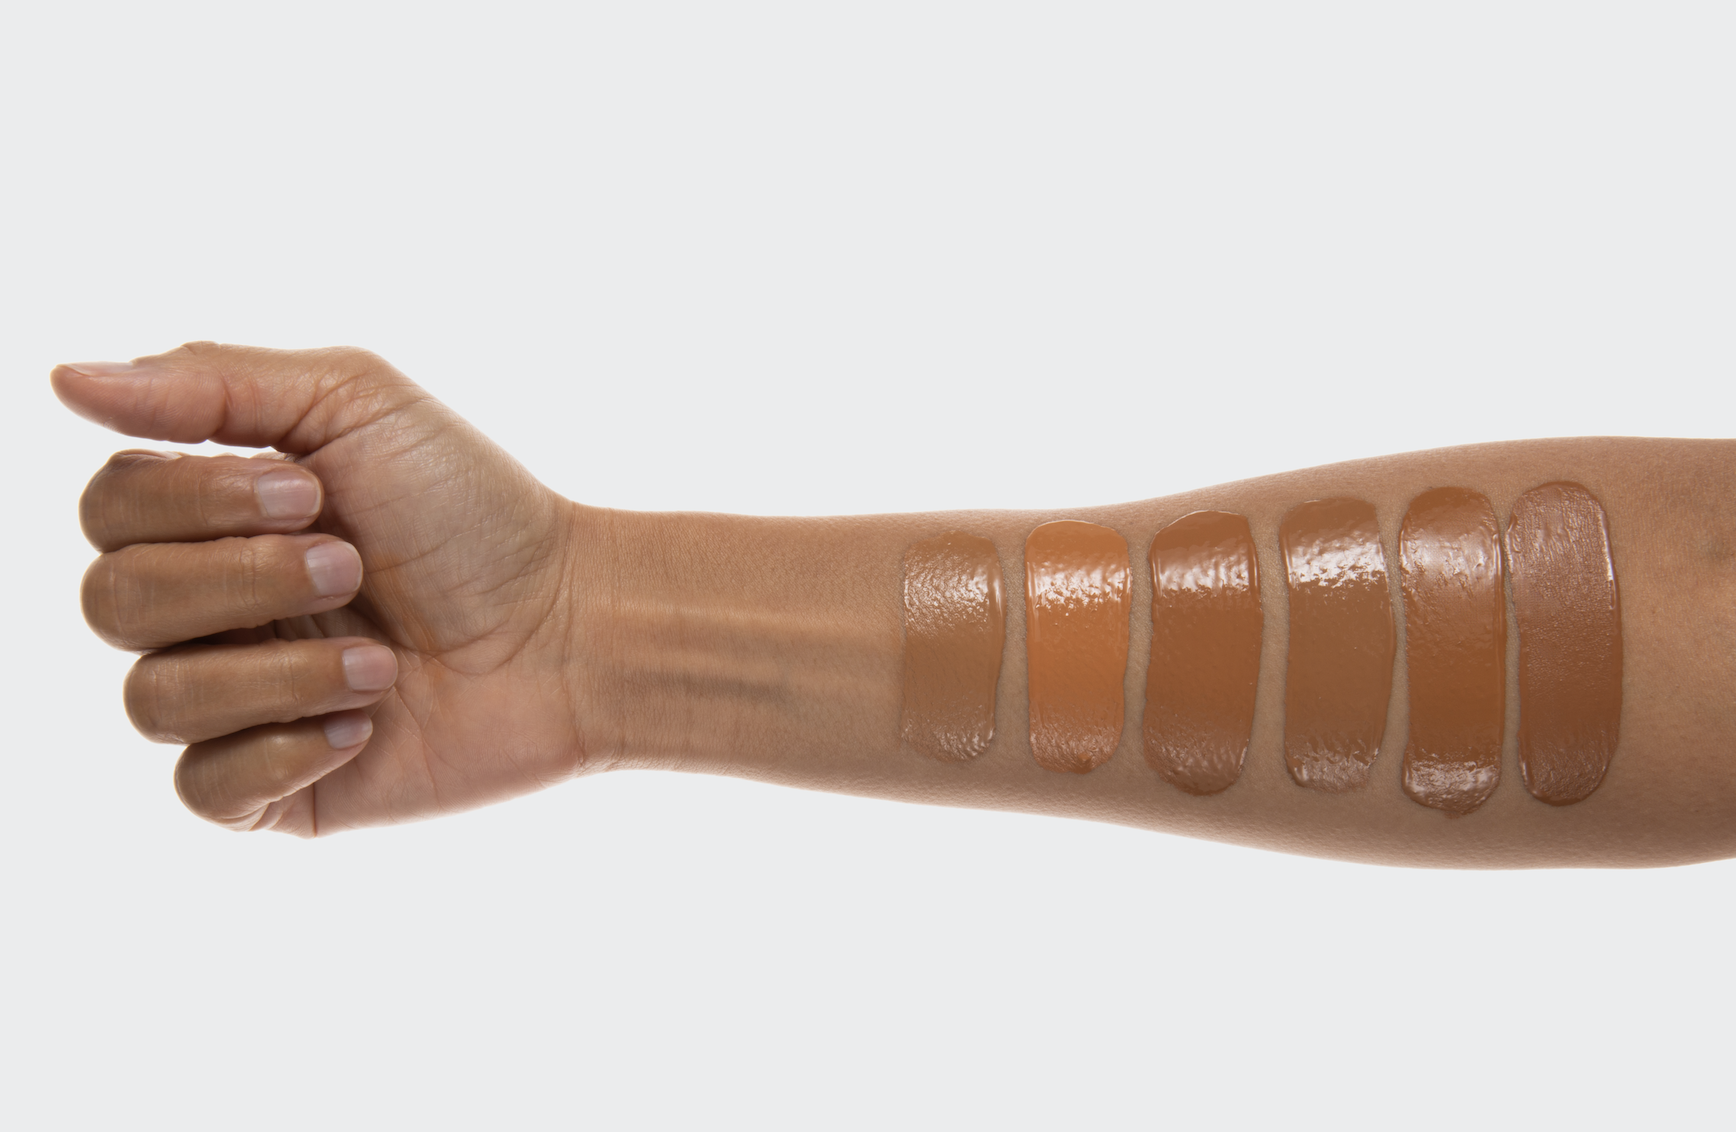 Uoma by Sharon C, Flawless IRL Skin Perfecting Foundation Bronze Venus T4 - image 4 of 8